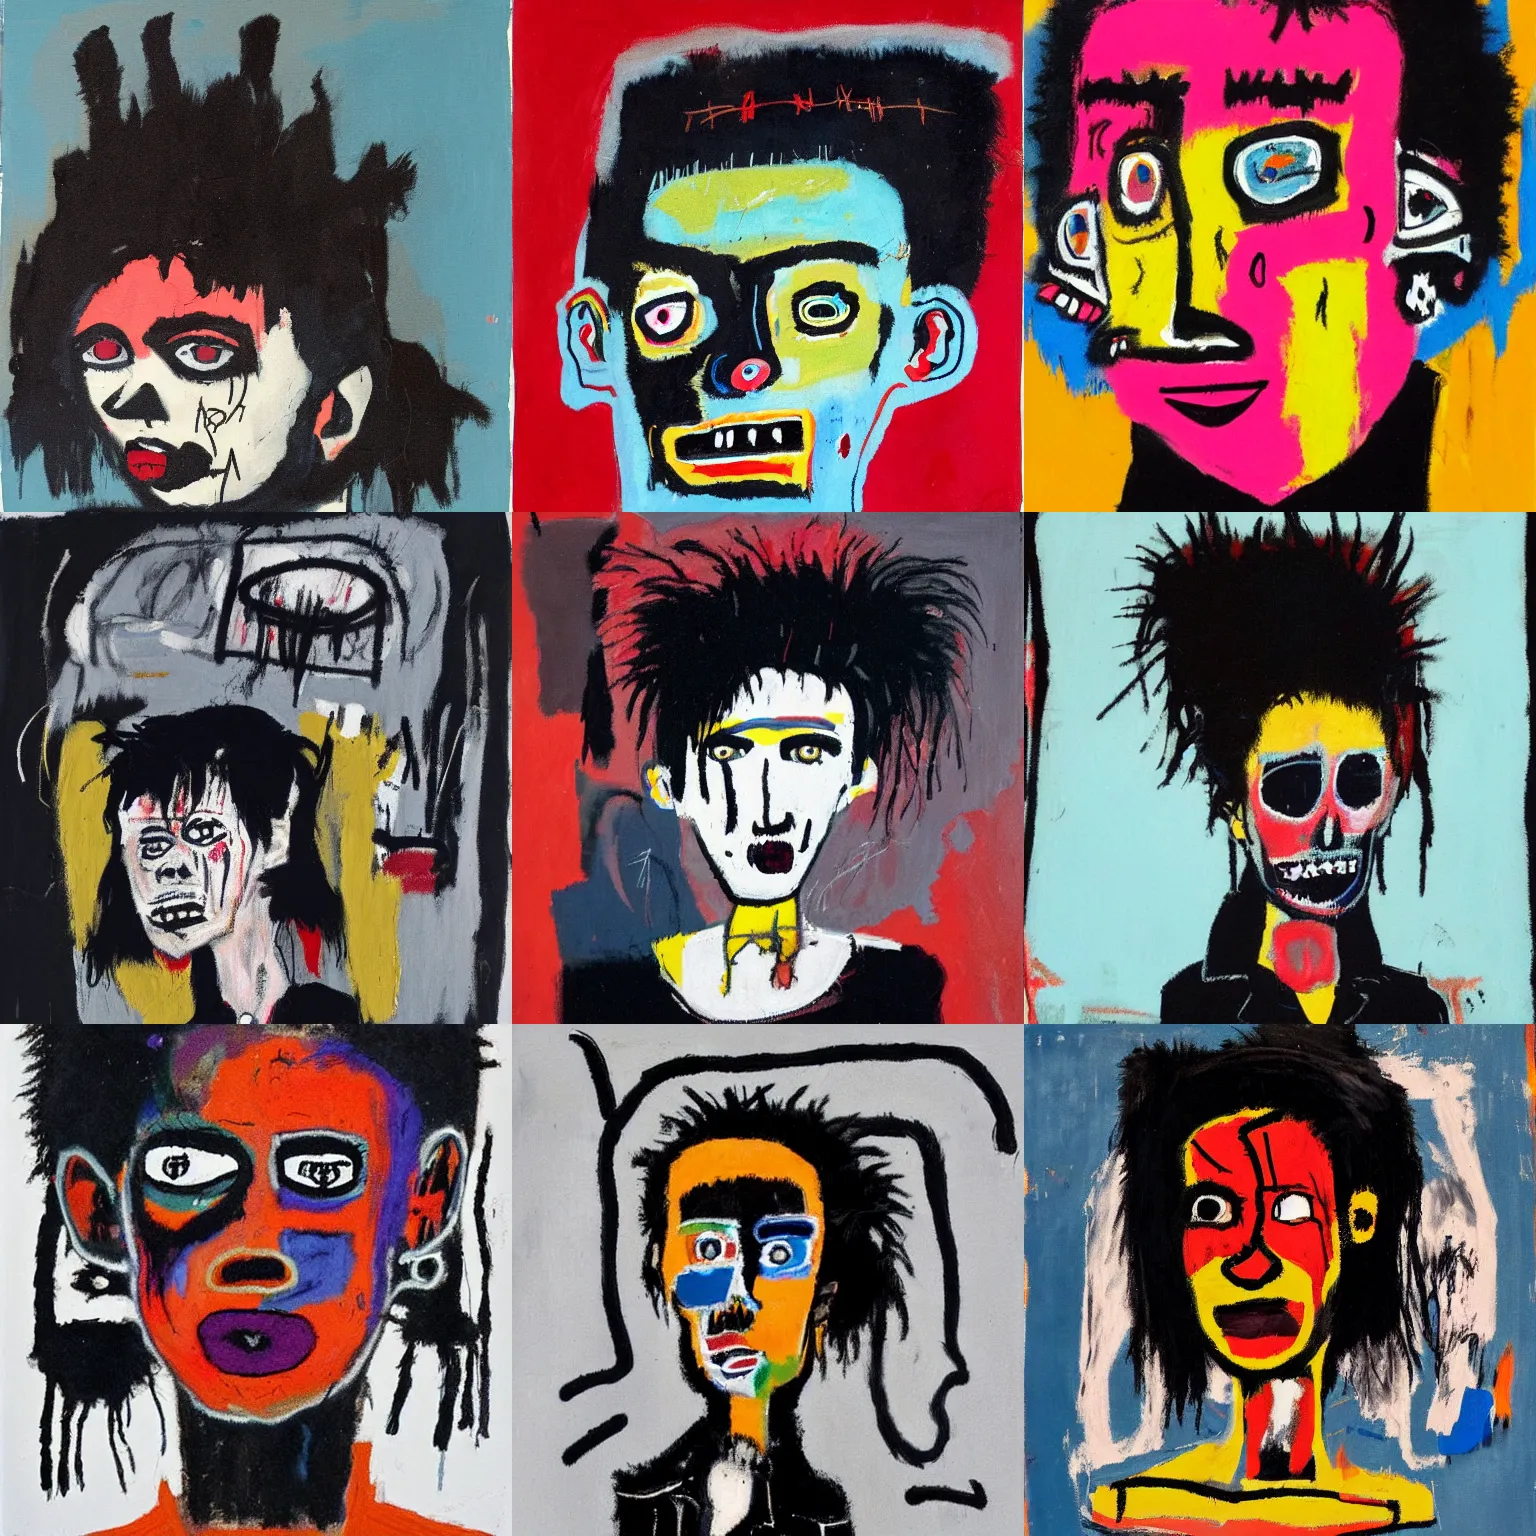 Prompt: A goth portrait painted by Jean-Michel Basquiat. Her hair is dark brown and cut into a short, messy pixie cut. She has a slightly rounded face, with a pointed chin, large entirely-black eyes, and a small nose. She is wearing a black tank top, a black leather jacket, a black knee-length skirt, a black choker, and black leather boots.